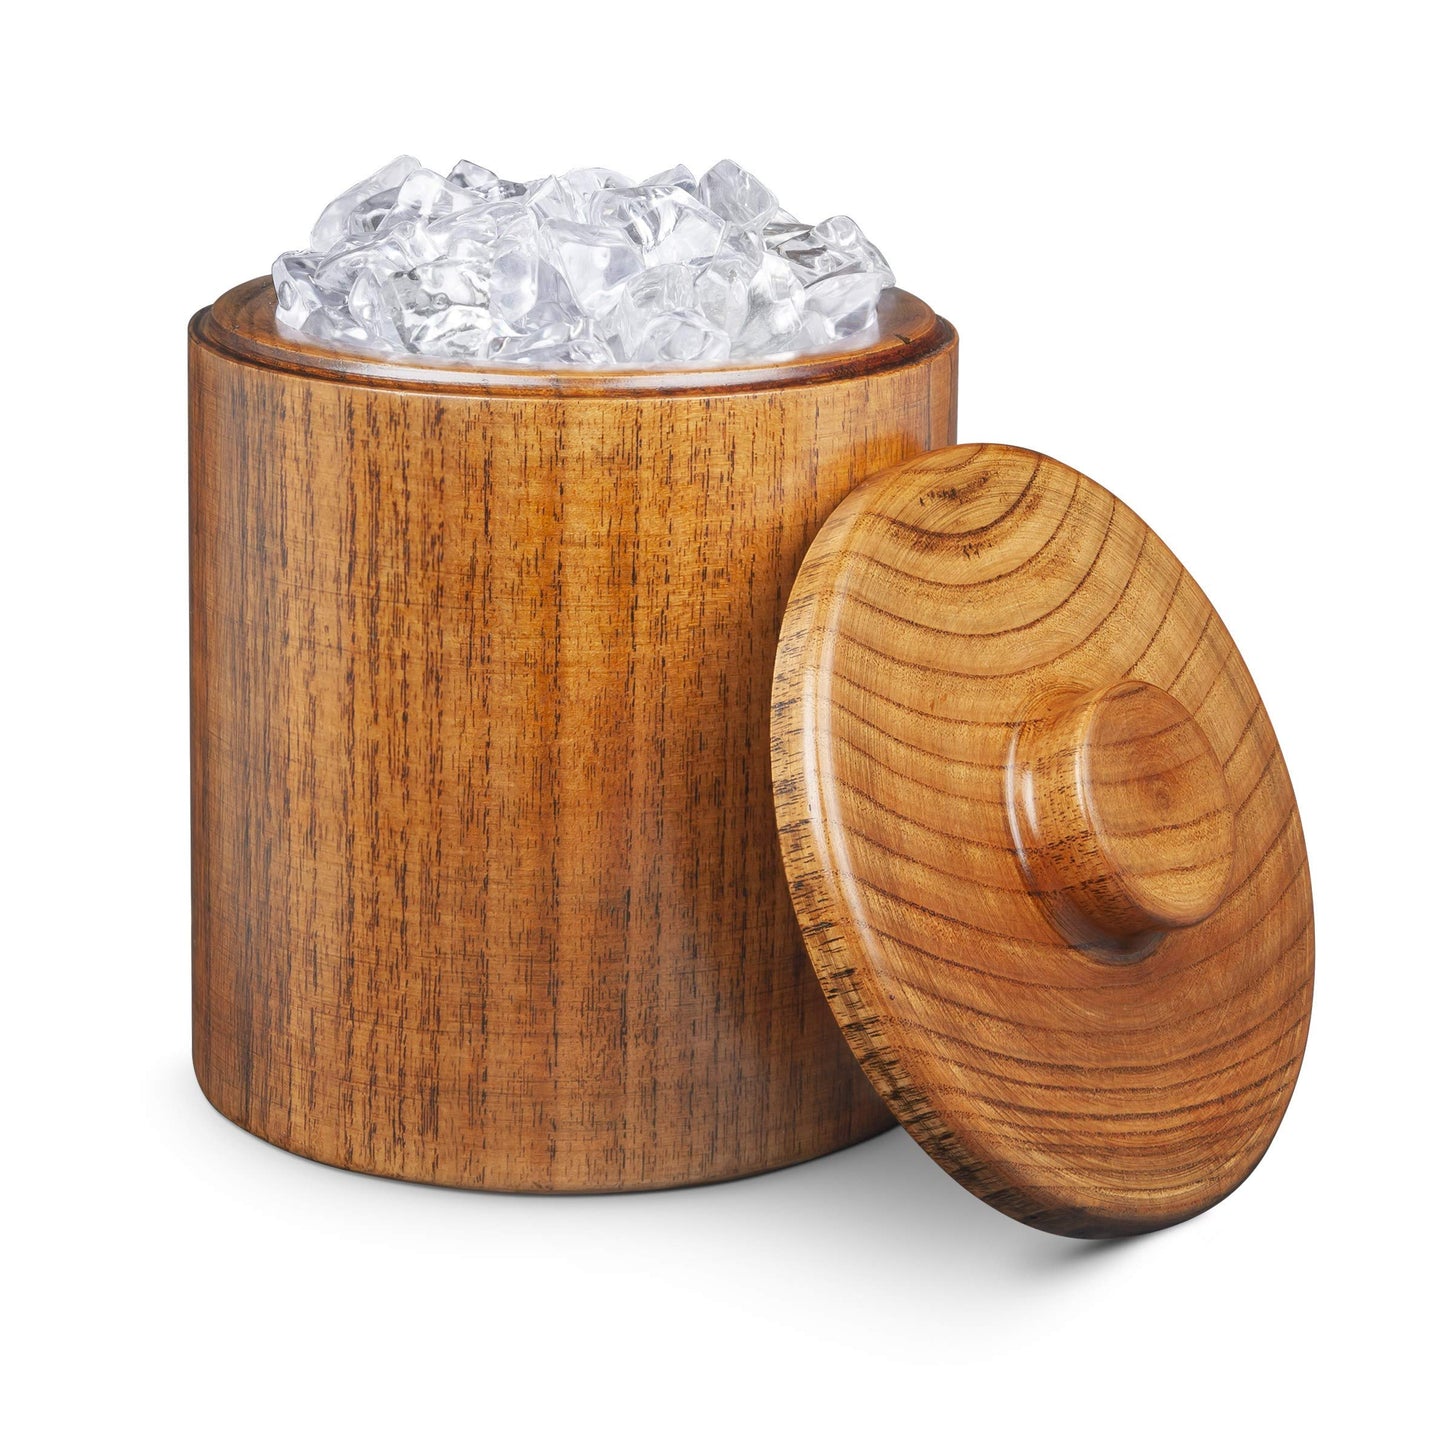 FINAL TOUCH SOLID WOOD ICE BUCKET